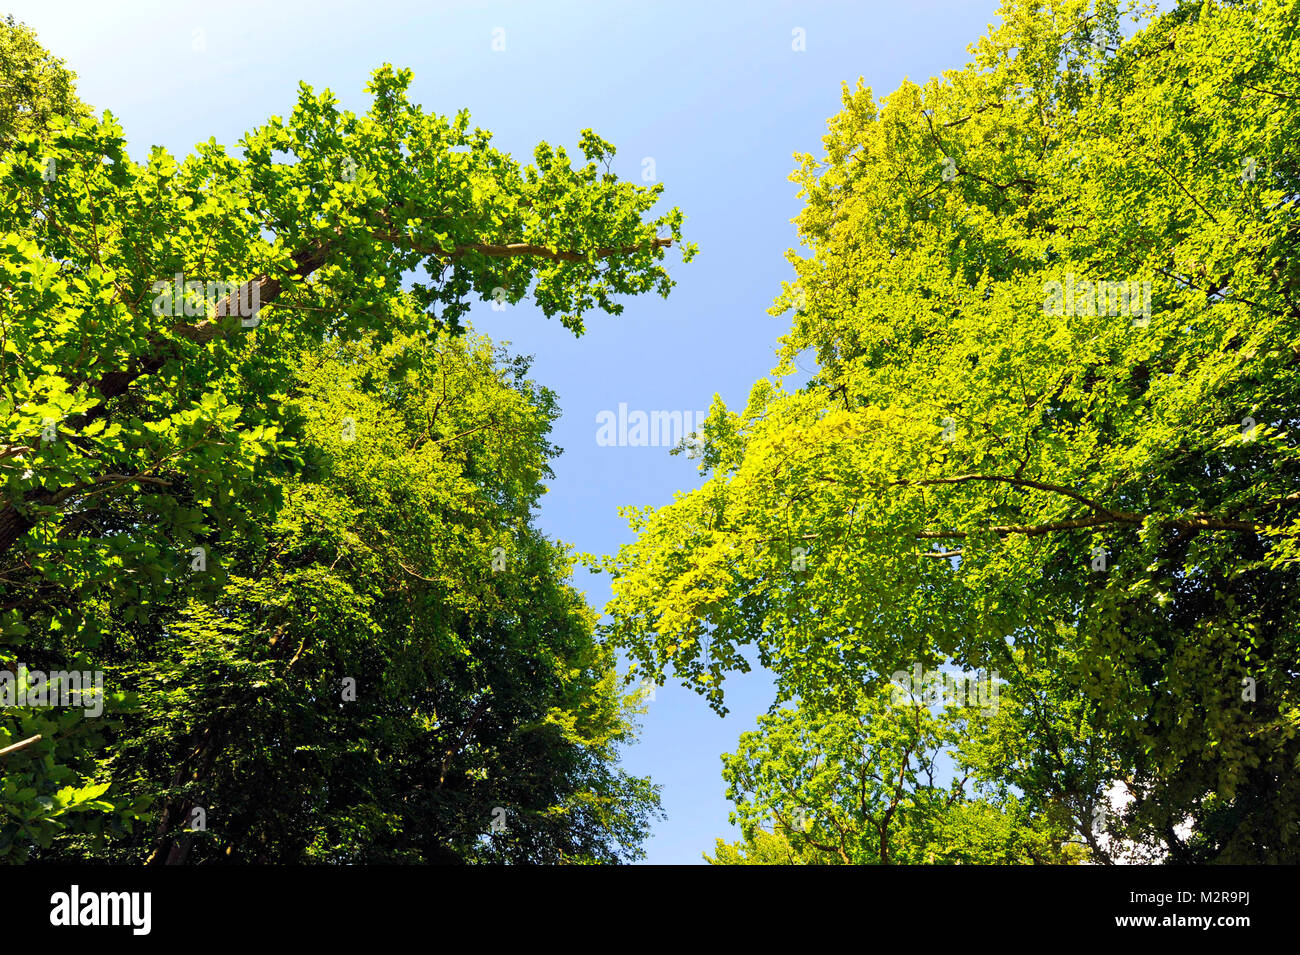 view to the treetops of a healthy foliage mixed forest with copper beeches, maples, oaks and other broad-leaved trees Stock Photo